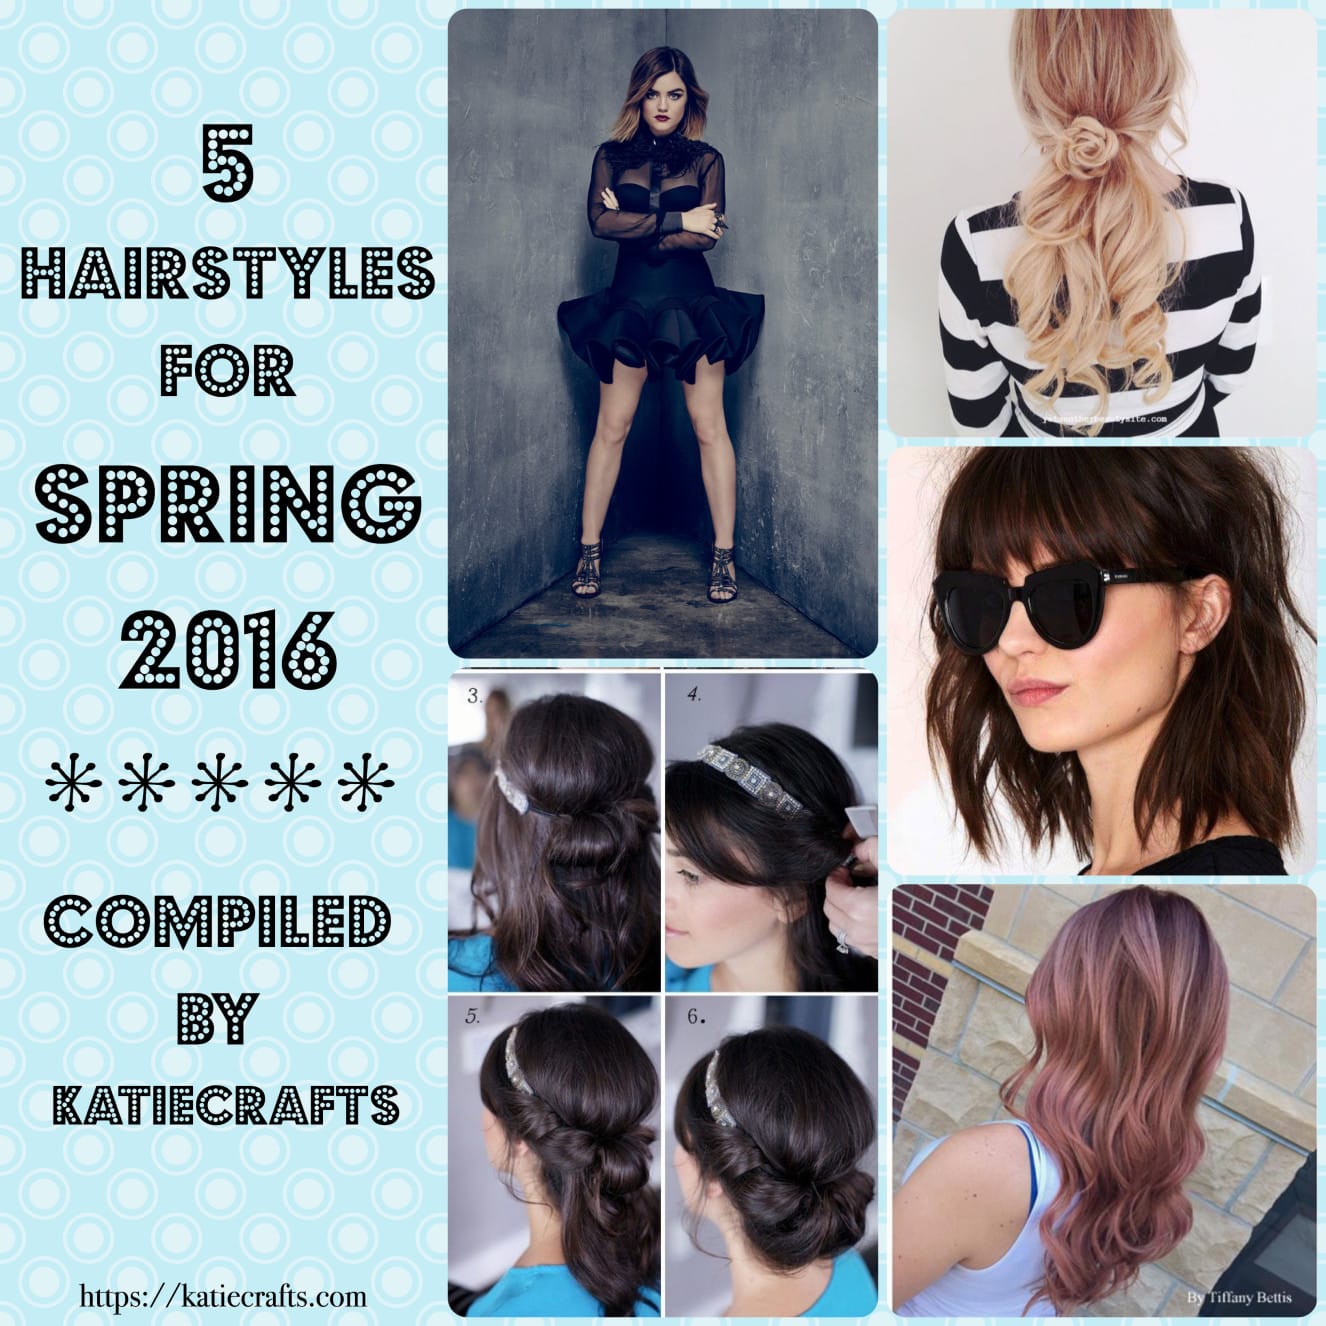 5 Hairstyles For Spring on Katie Crafts; https://www.katiecrafts.com